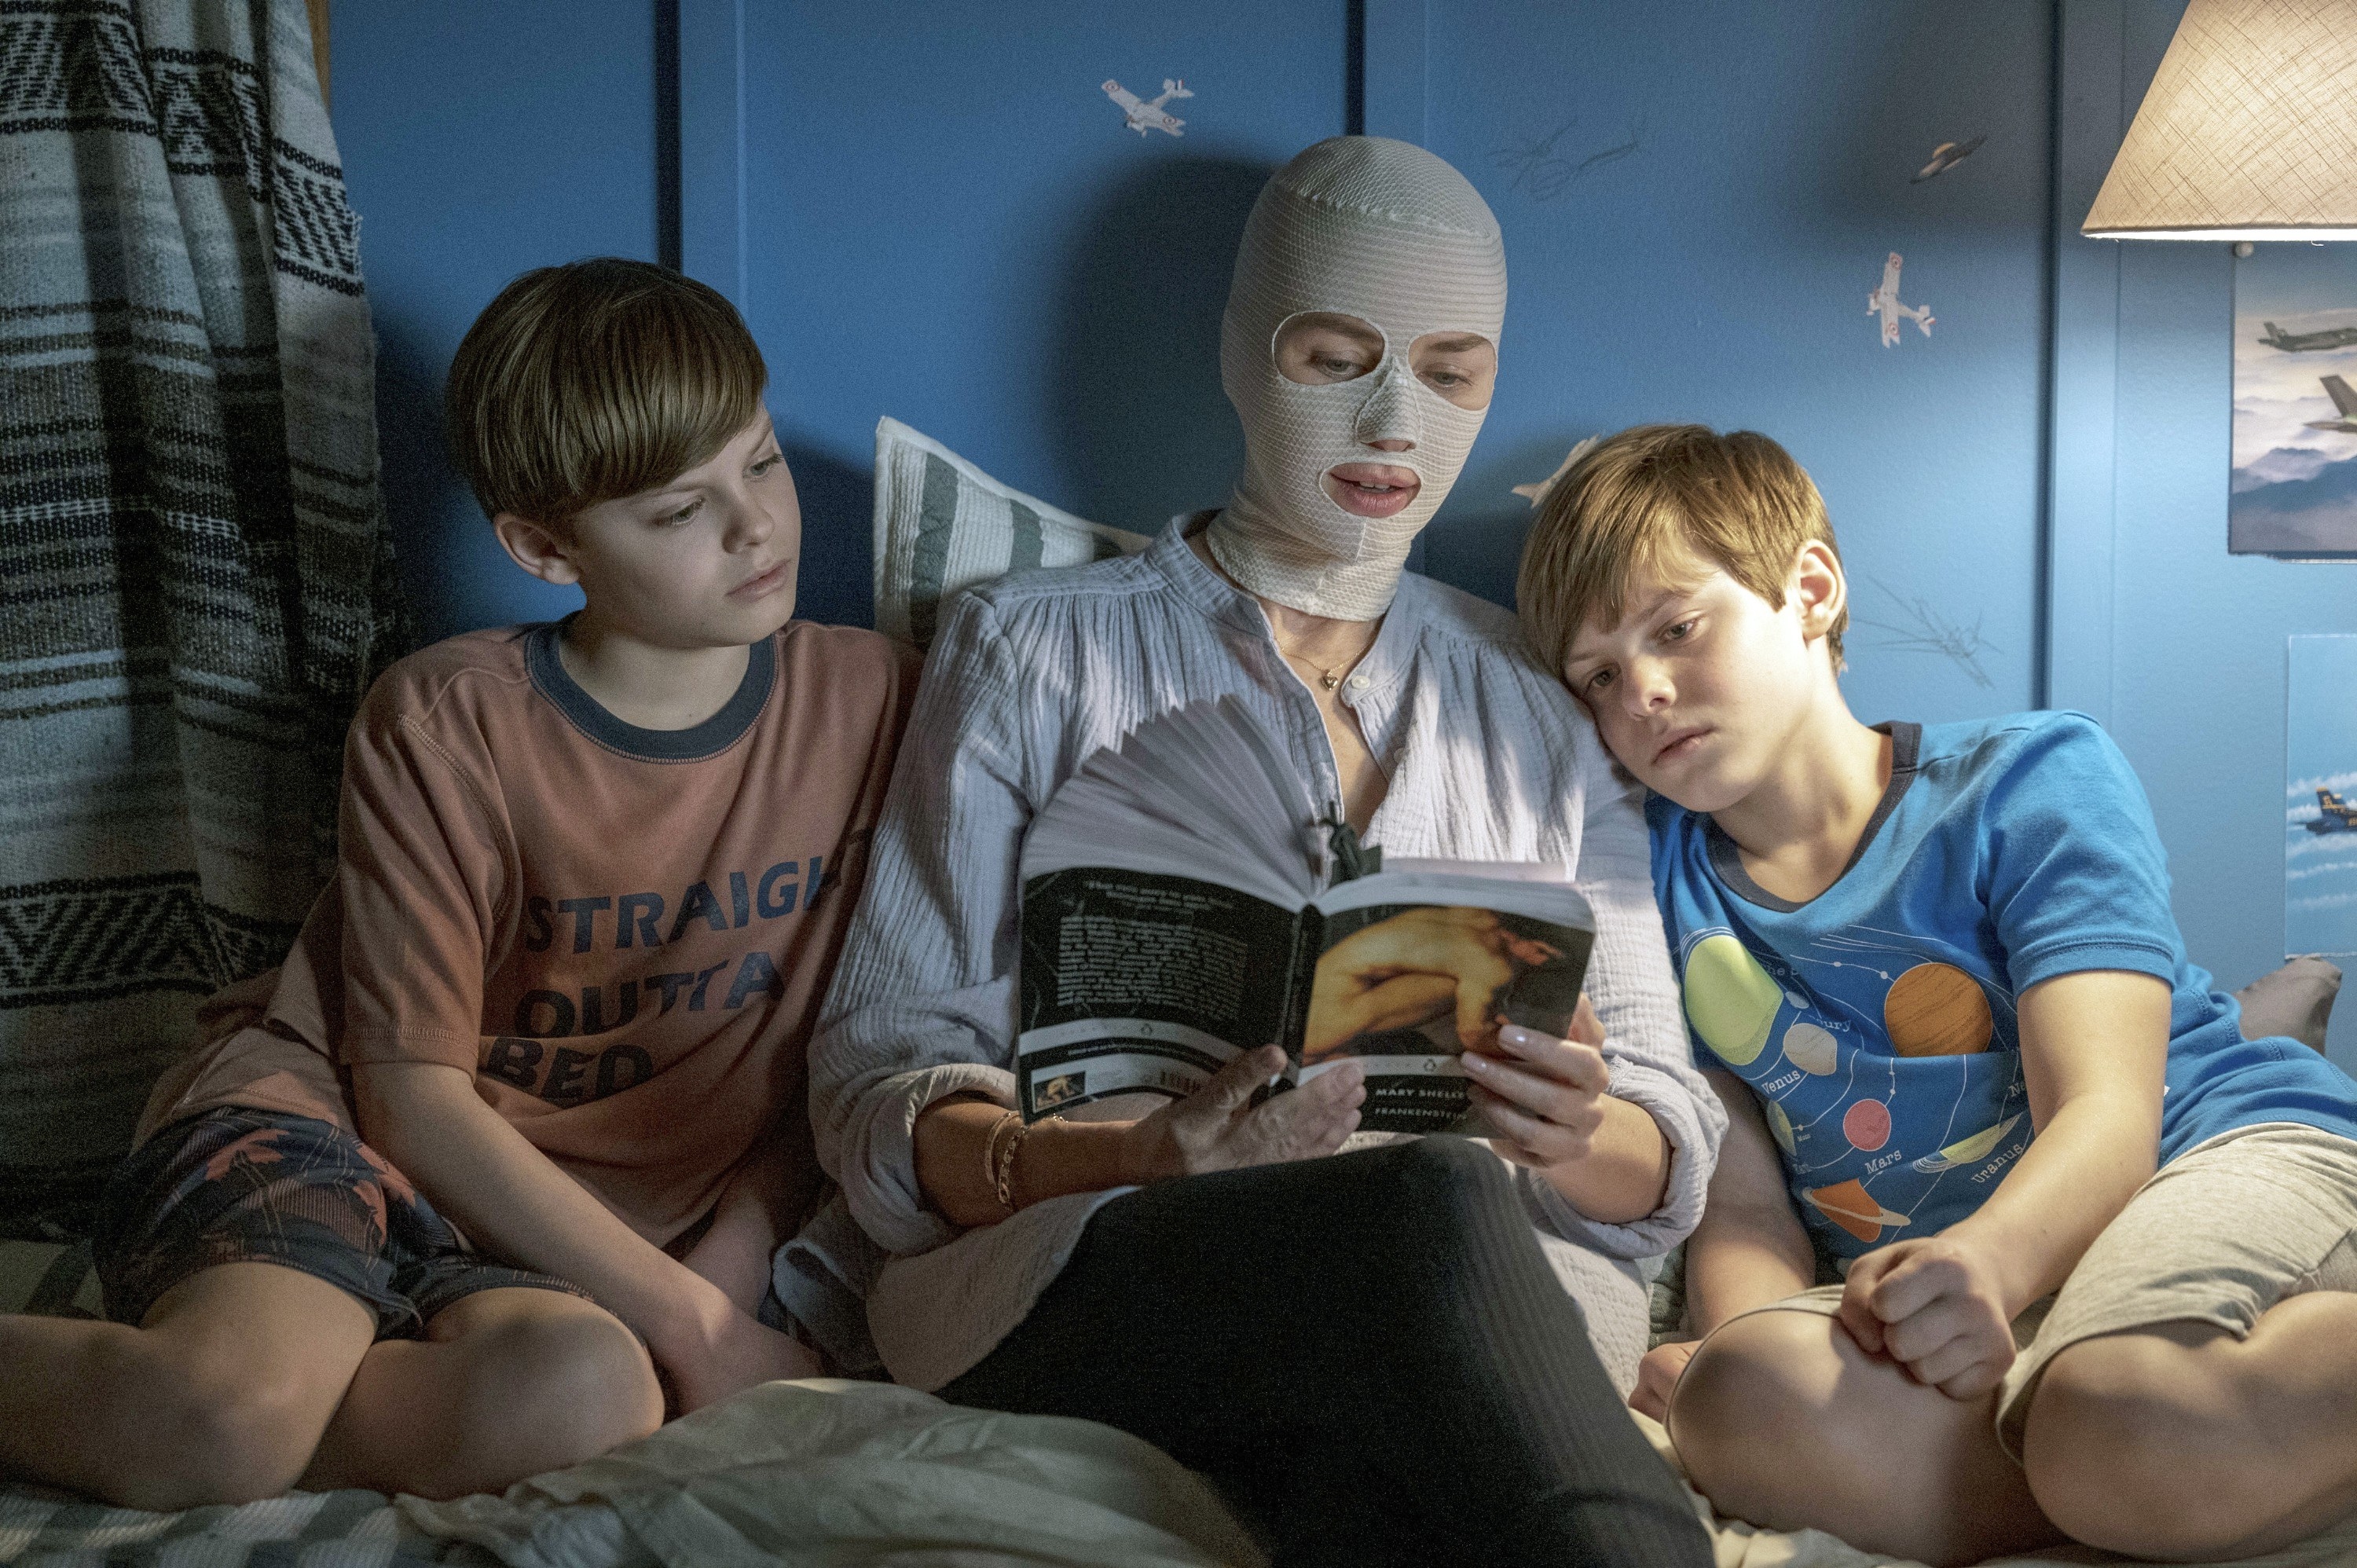 A woman in a strange white mask sits in bed reading a book to two small boys